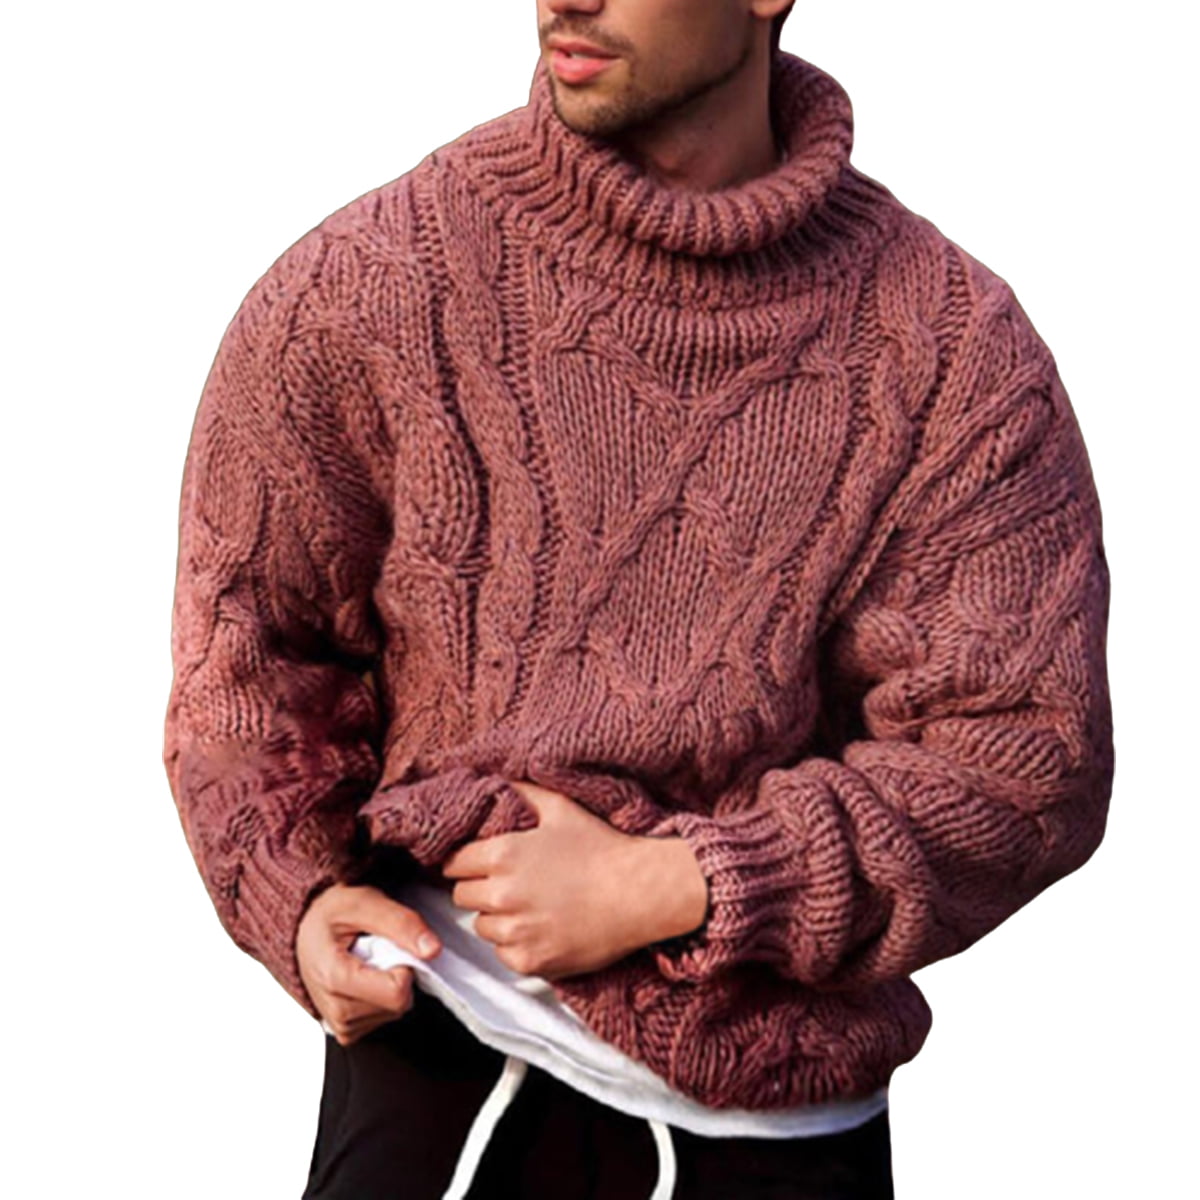 Howme Mens Knit Long-Sleeve Mock Neck Solid Color Pullovers Sweater